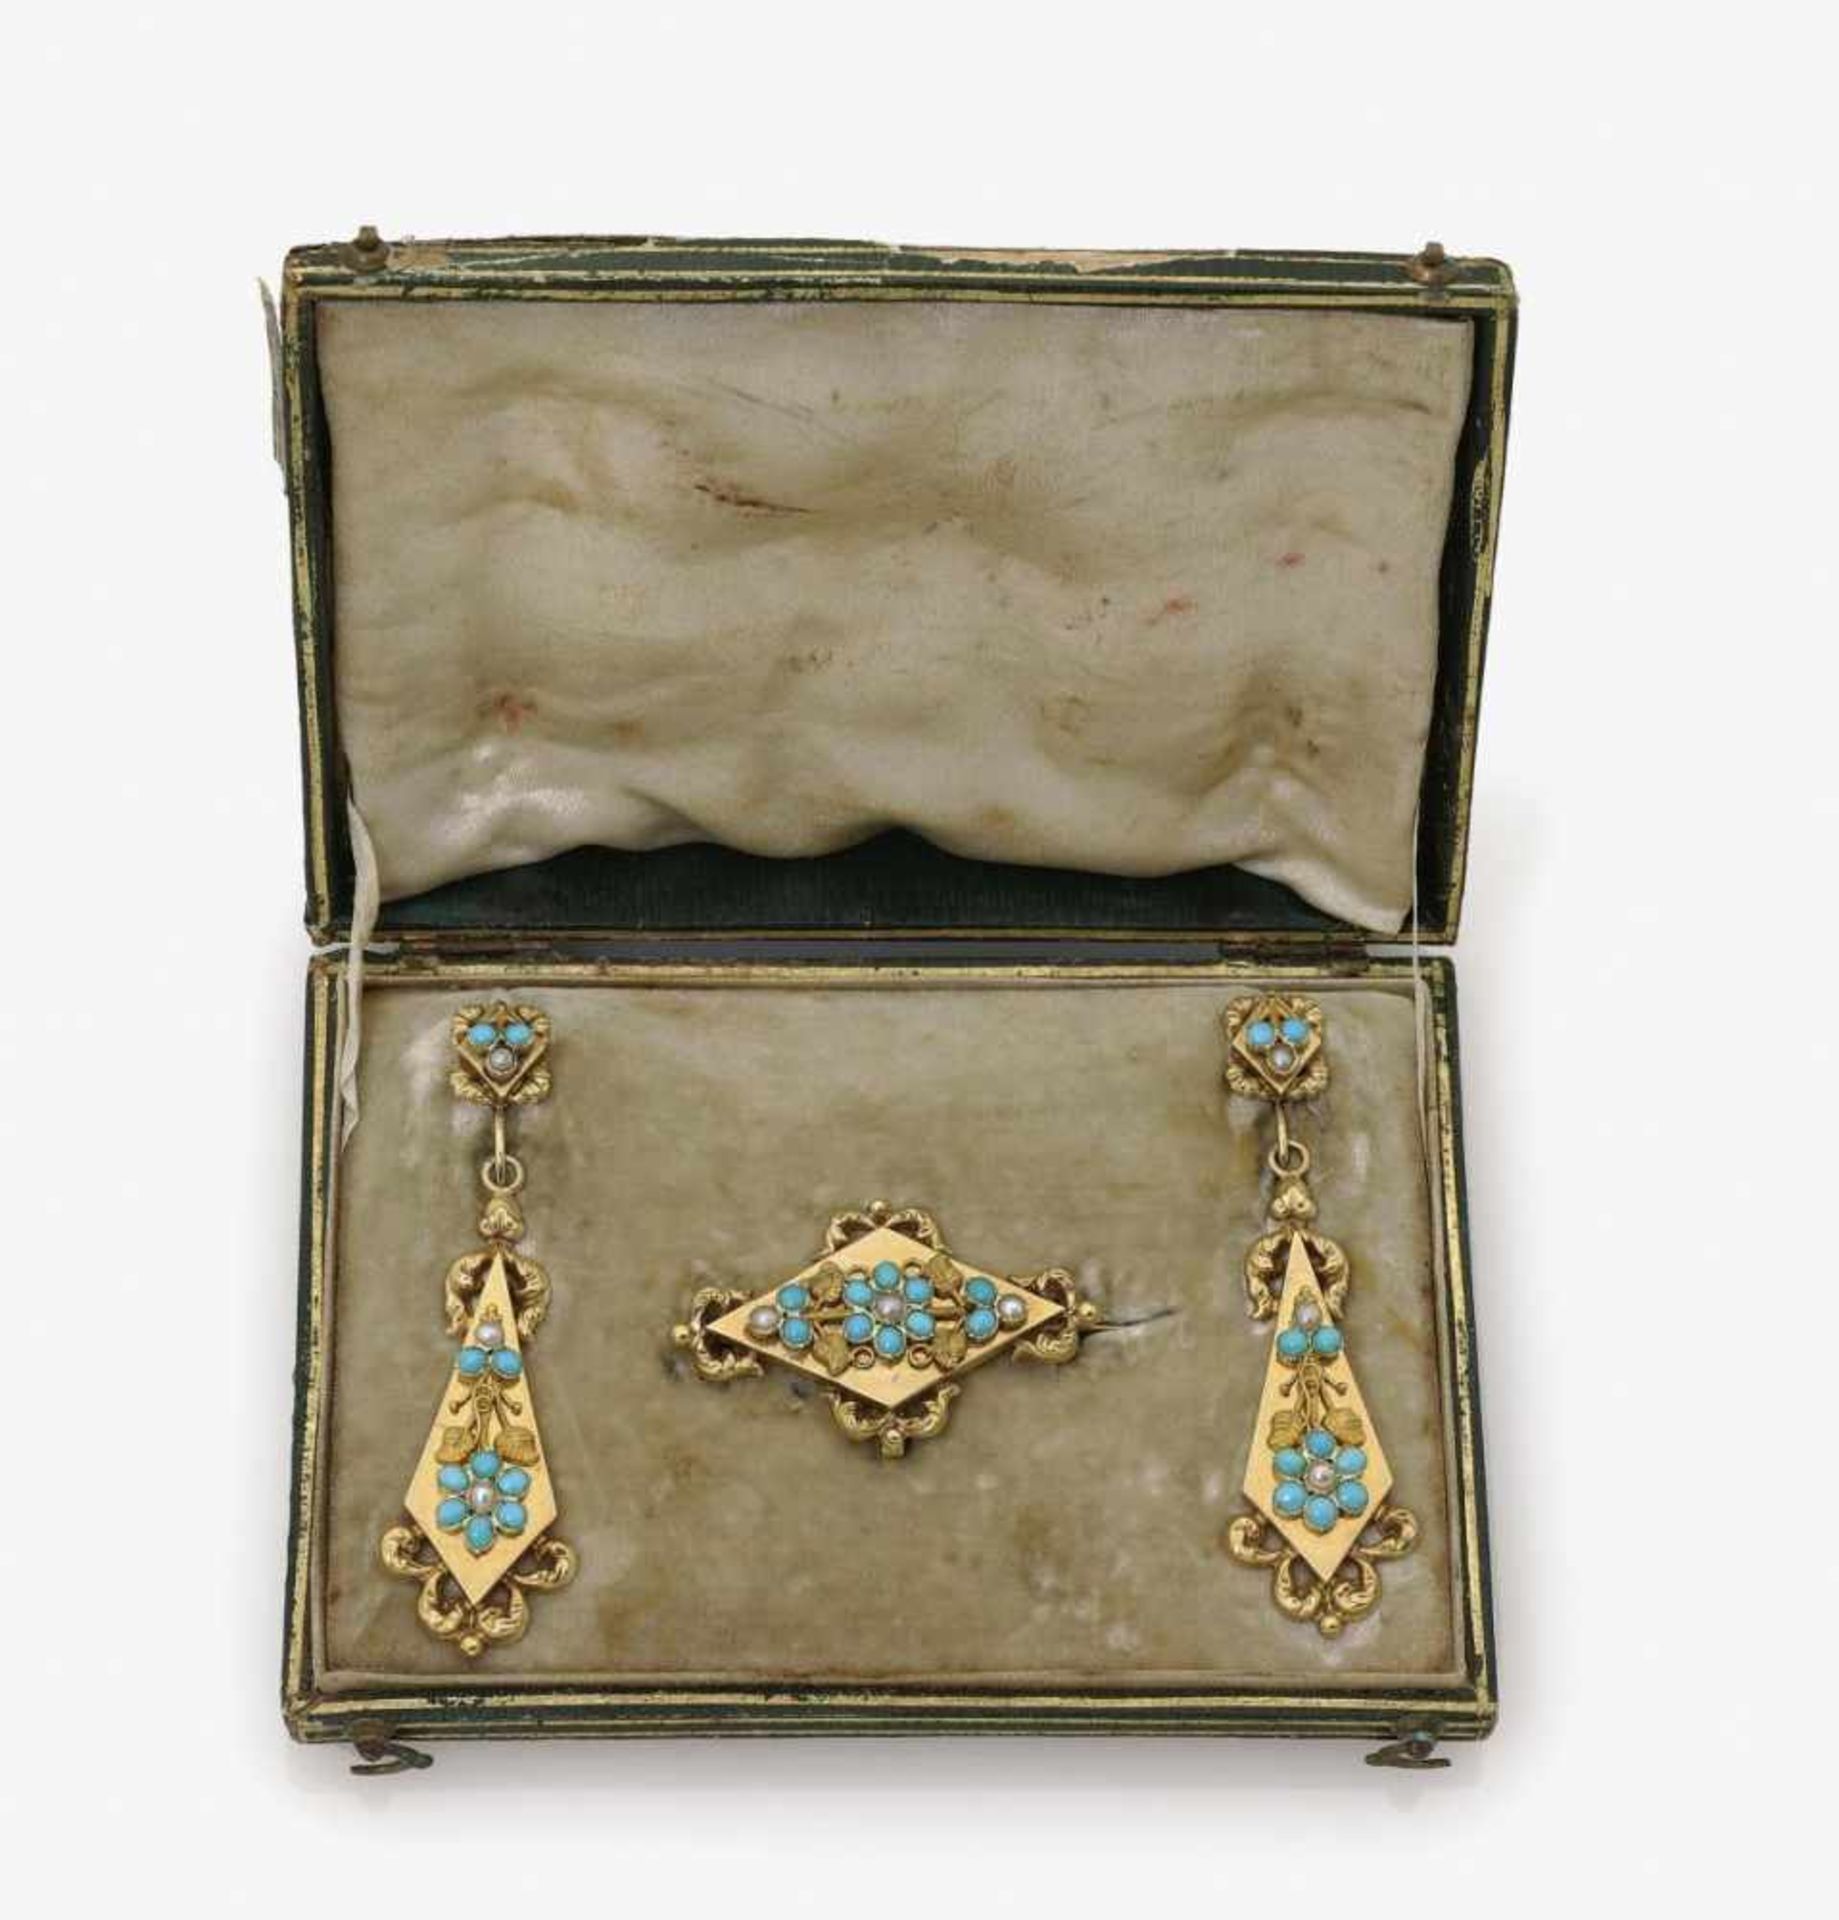 A Turquoise Demi Parure, consisting of a Brooch and EarringsProbably France, circa 1850 18K yellow